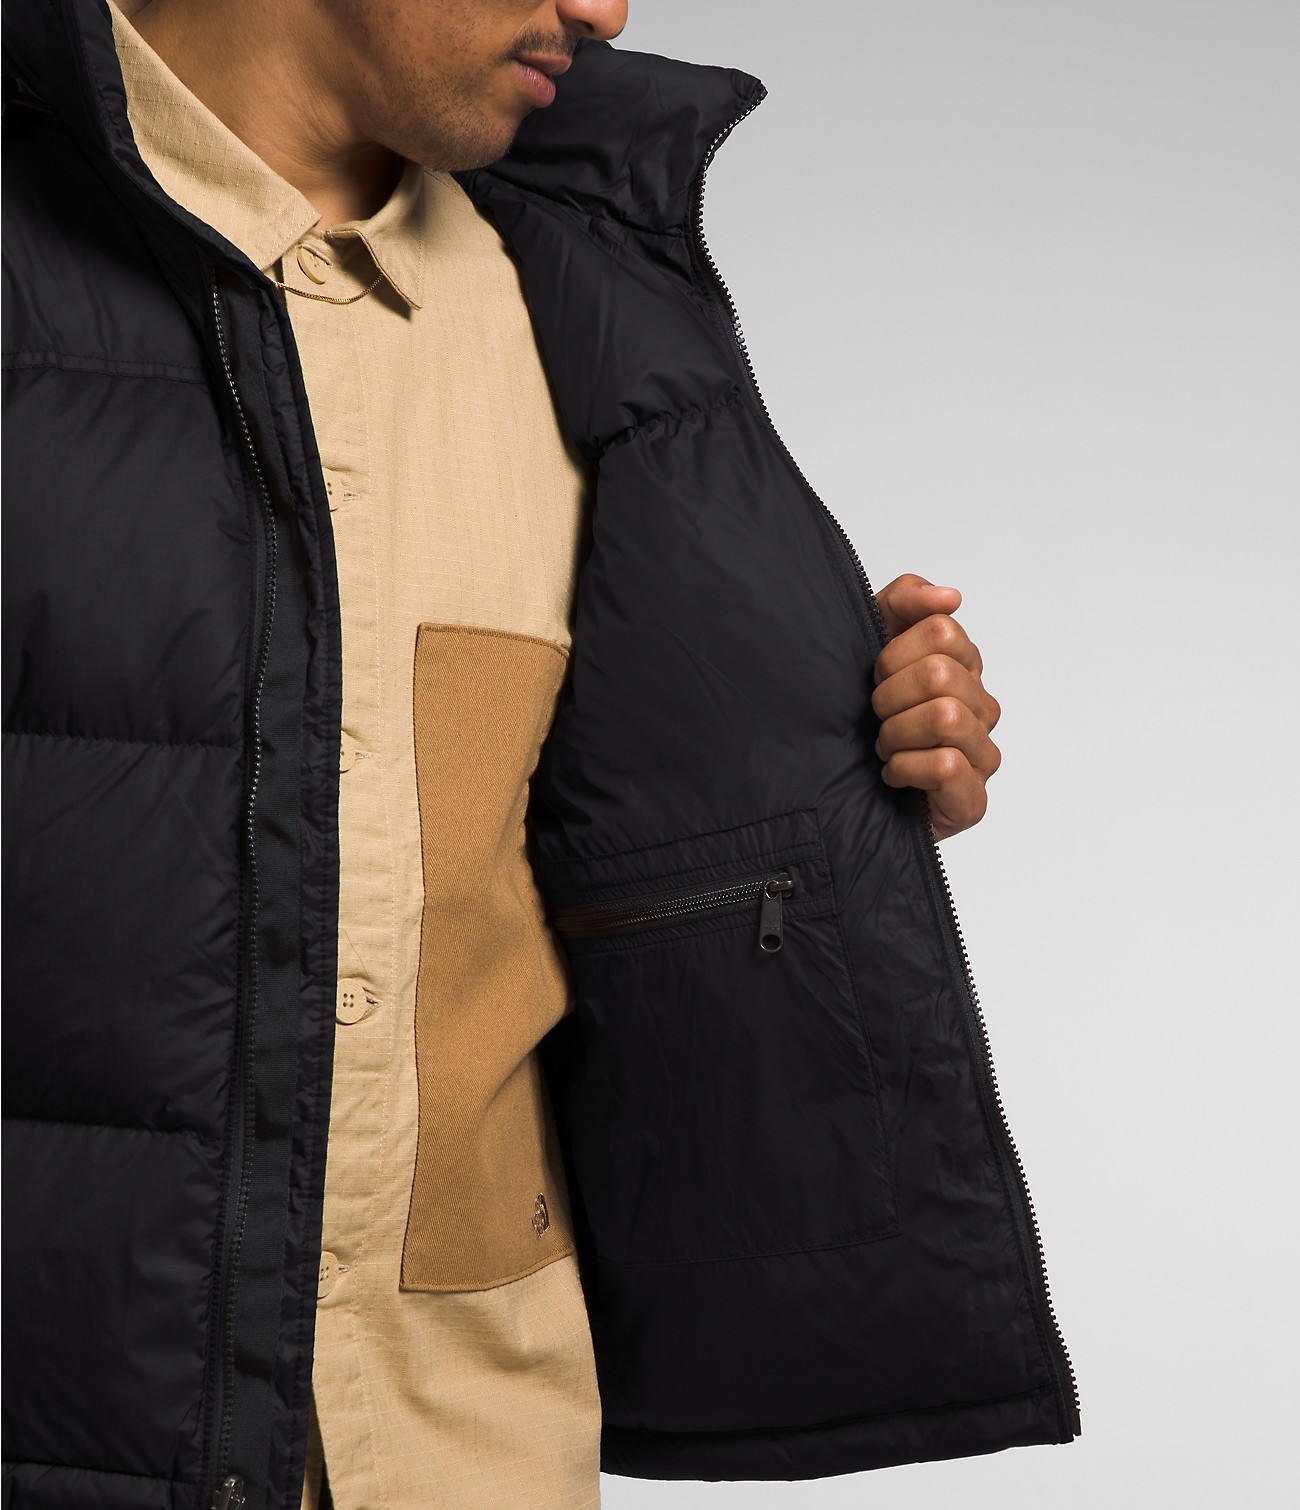 Unlock Wilderness' choice in the Patagonia Vs North Face comparison, the 1996 Retro Nuptse Jacket by The North Face